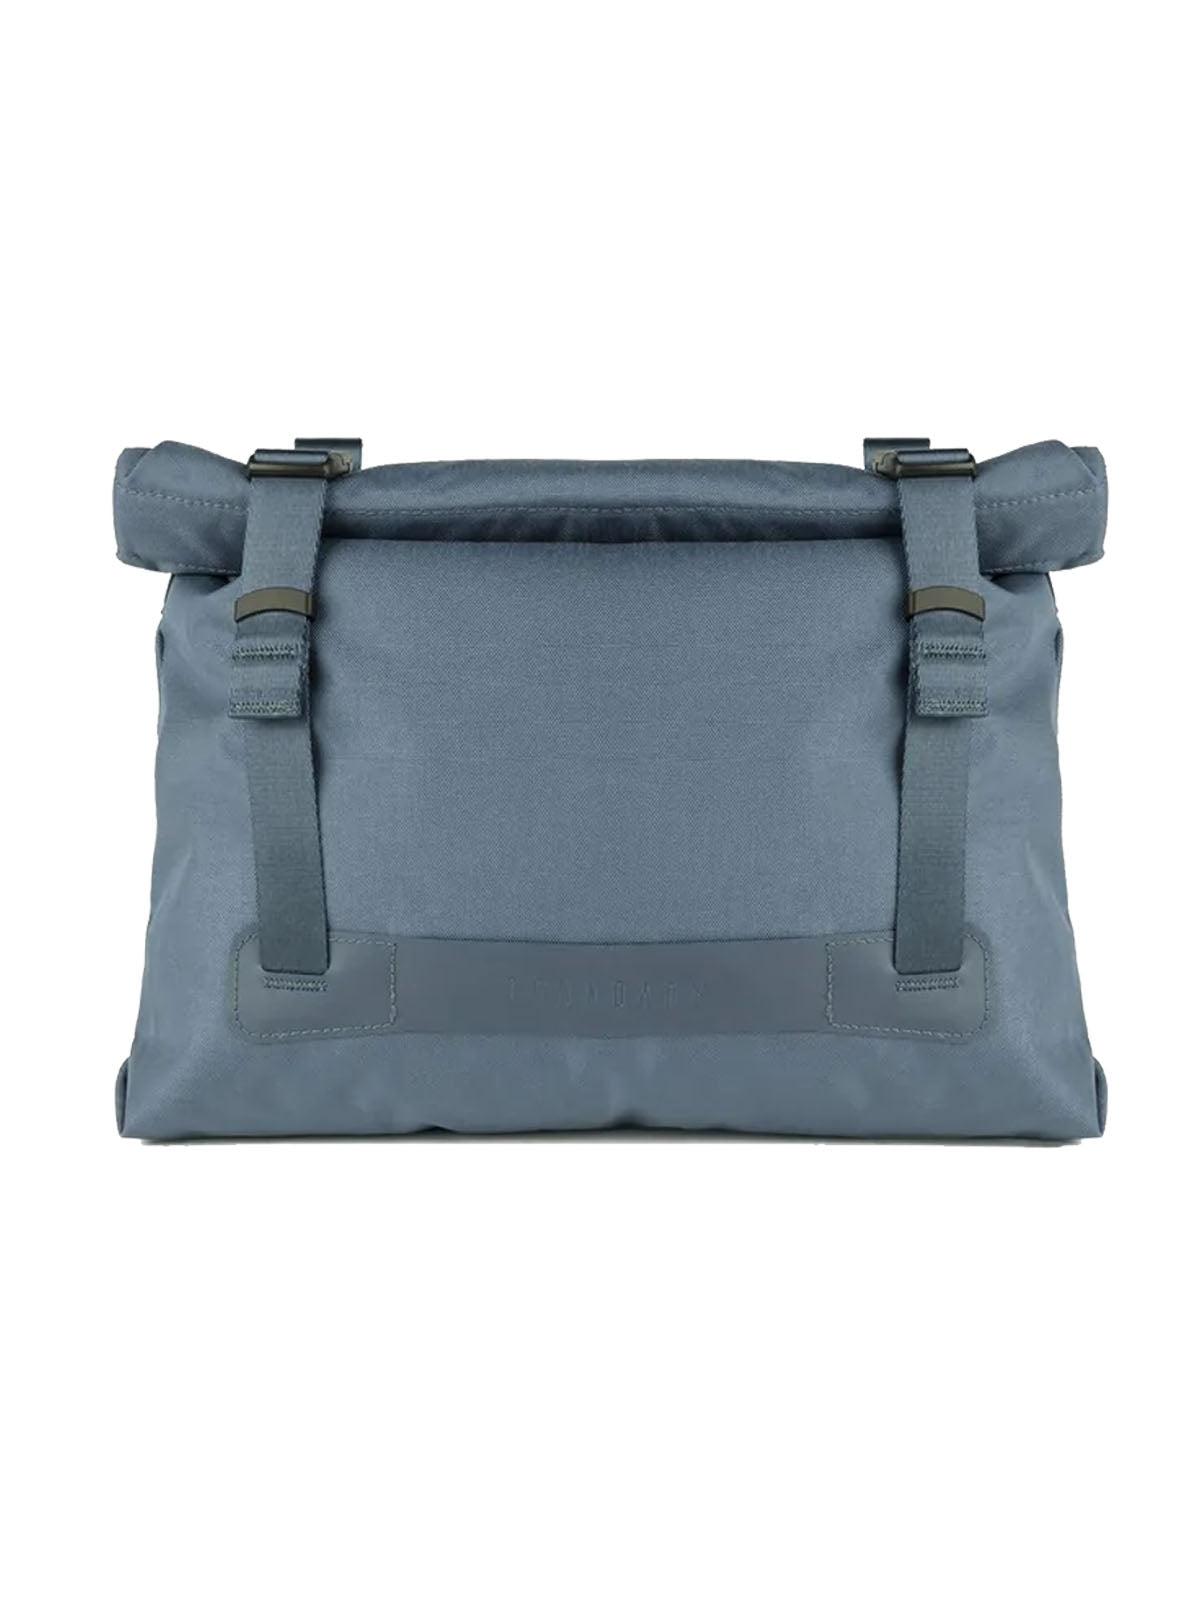 Boundary Supply WR Pouch